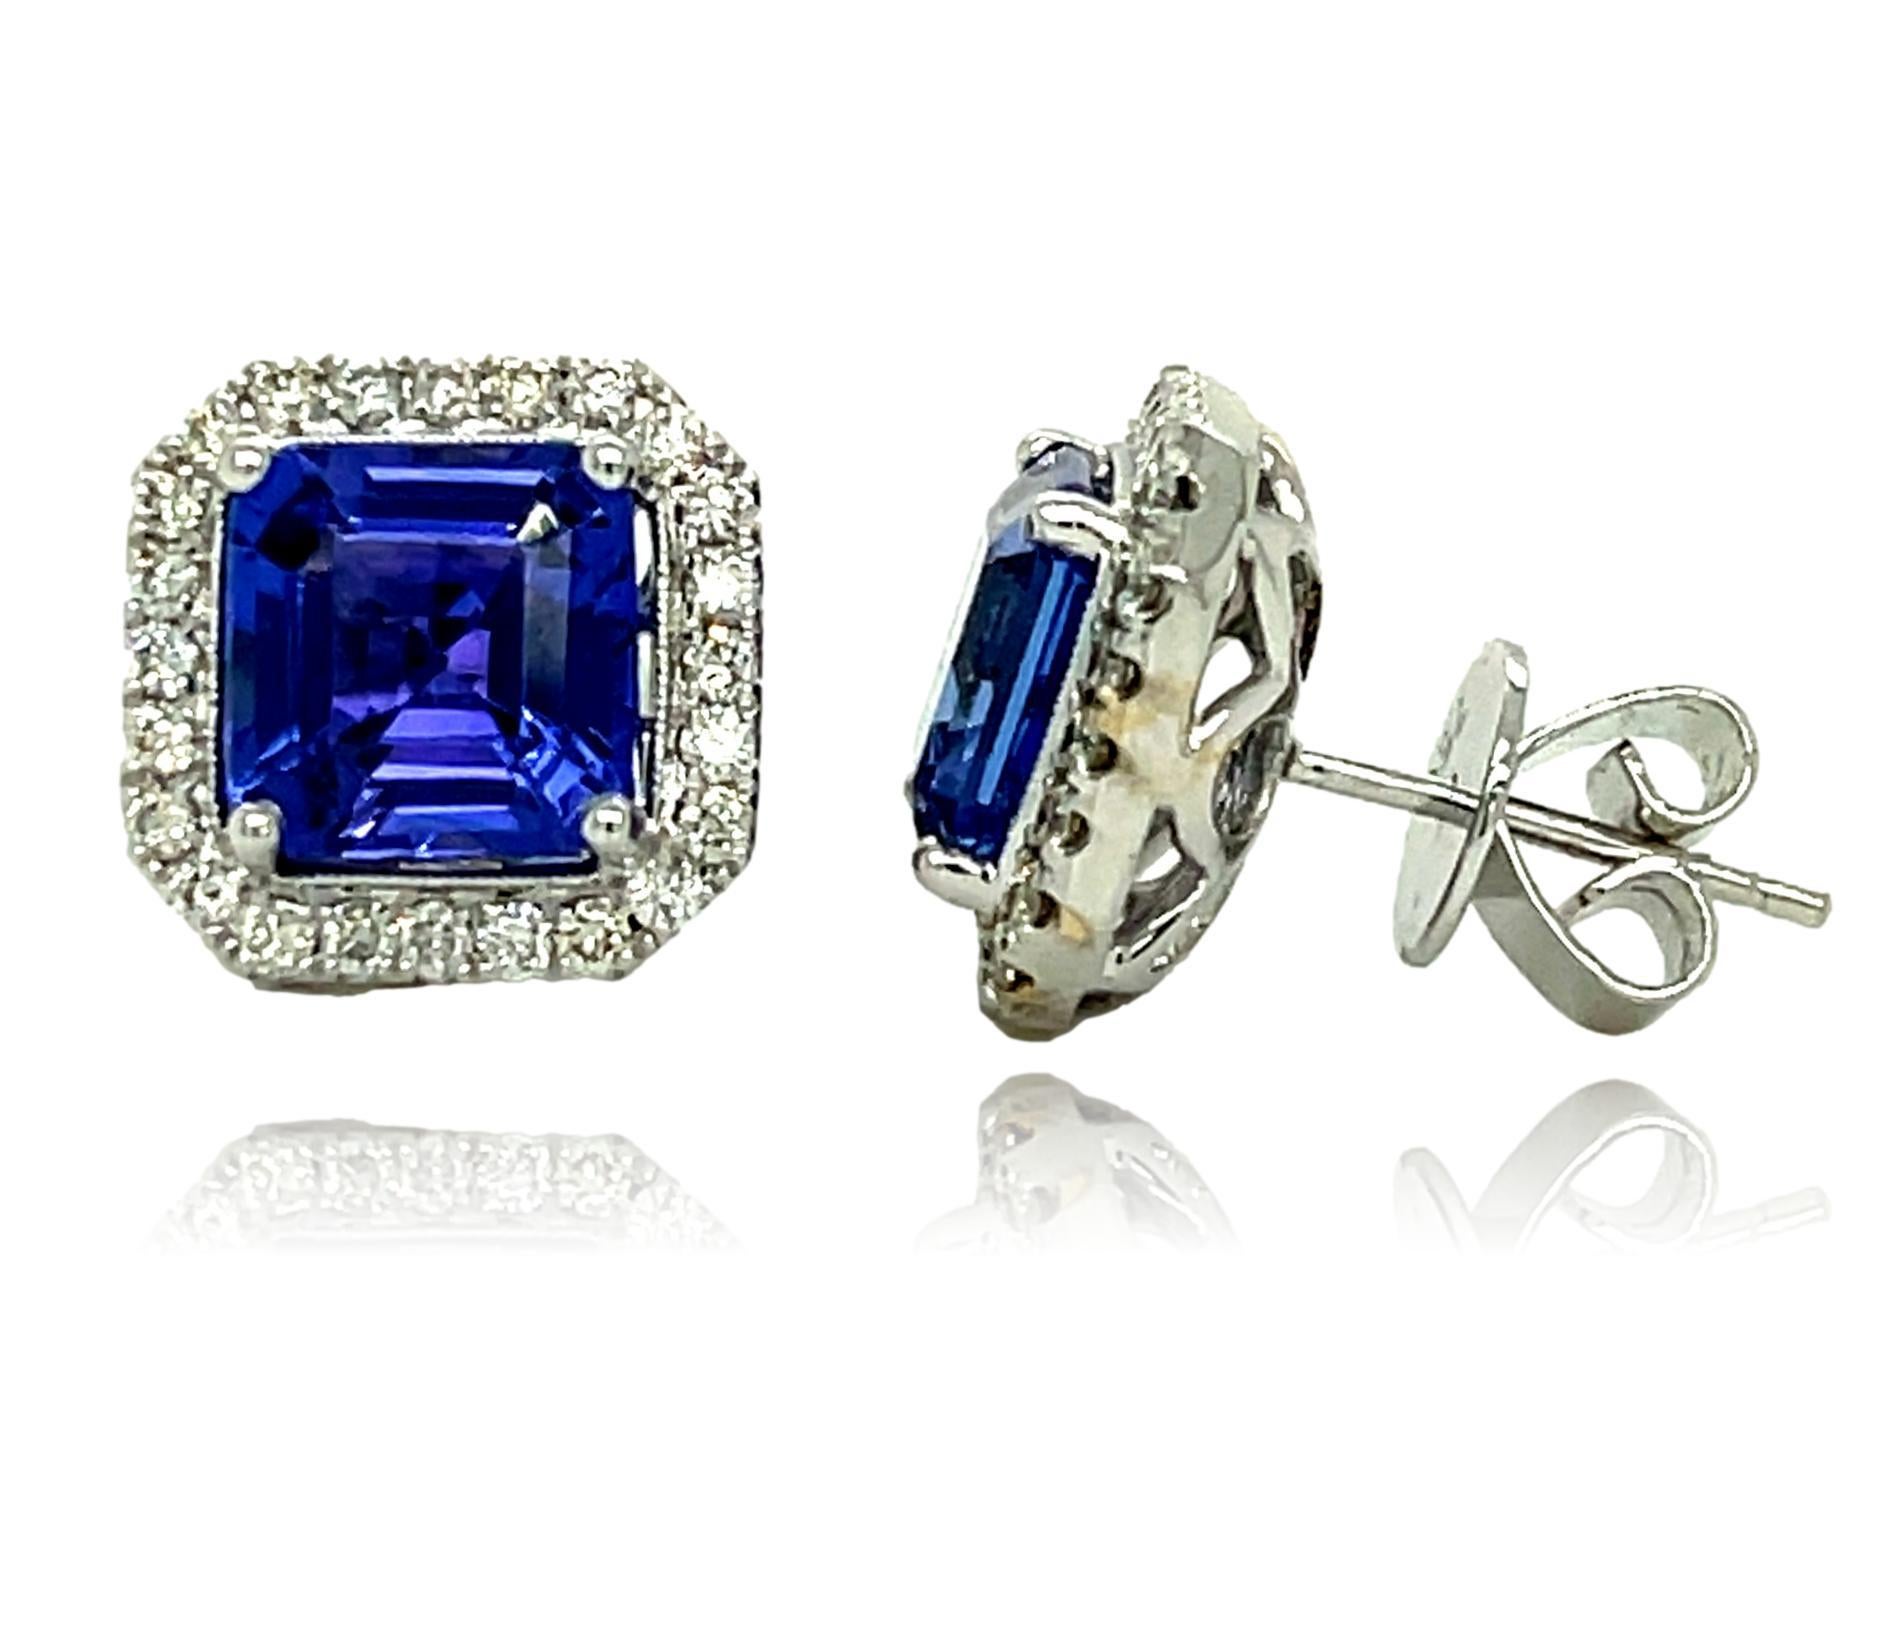 These stunning AAA Tanzanite stud earrings are surrounded by shimmering diamonds. There is a double push lock for extra security. These earrings have detailed tags attached and come in a beautiful box ready for the perfect gift!

14KW:           